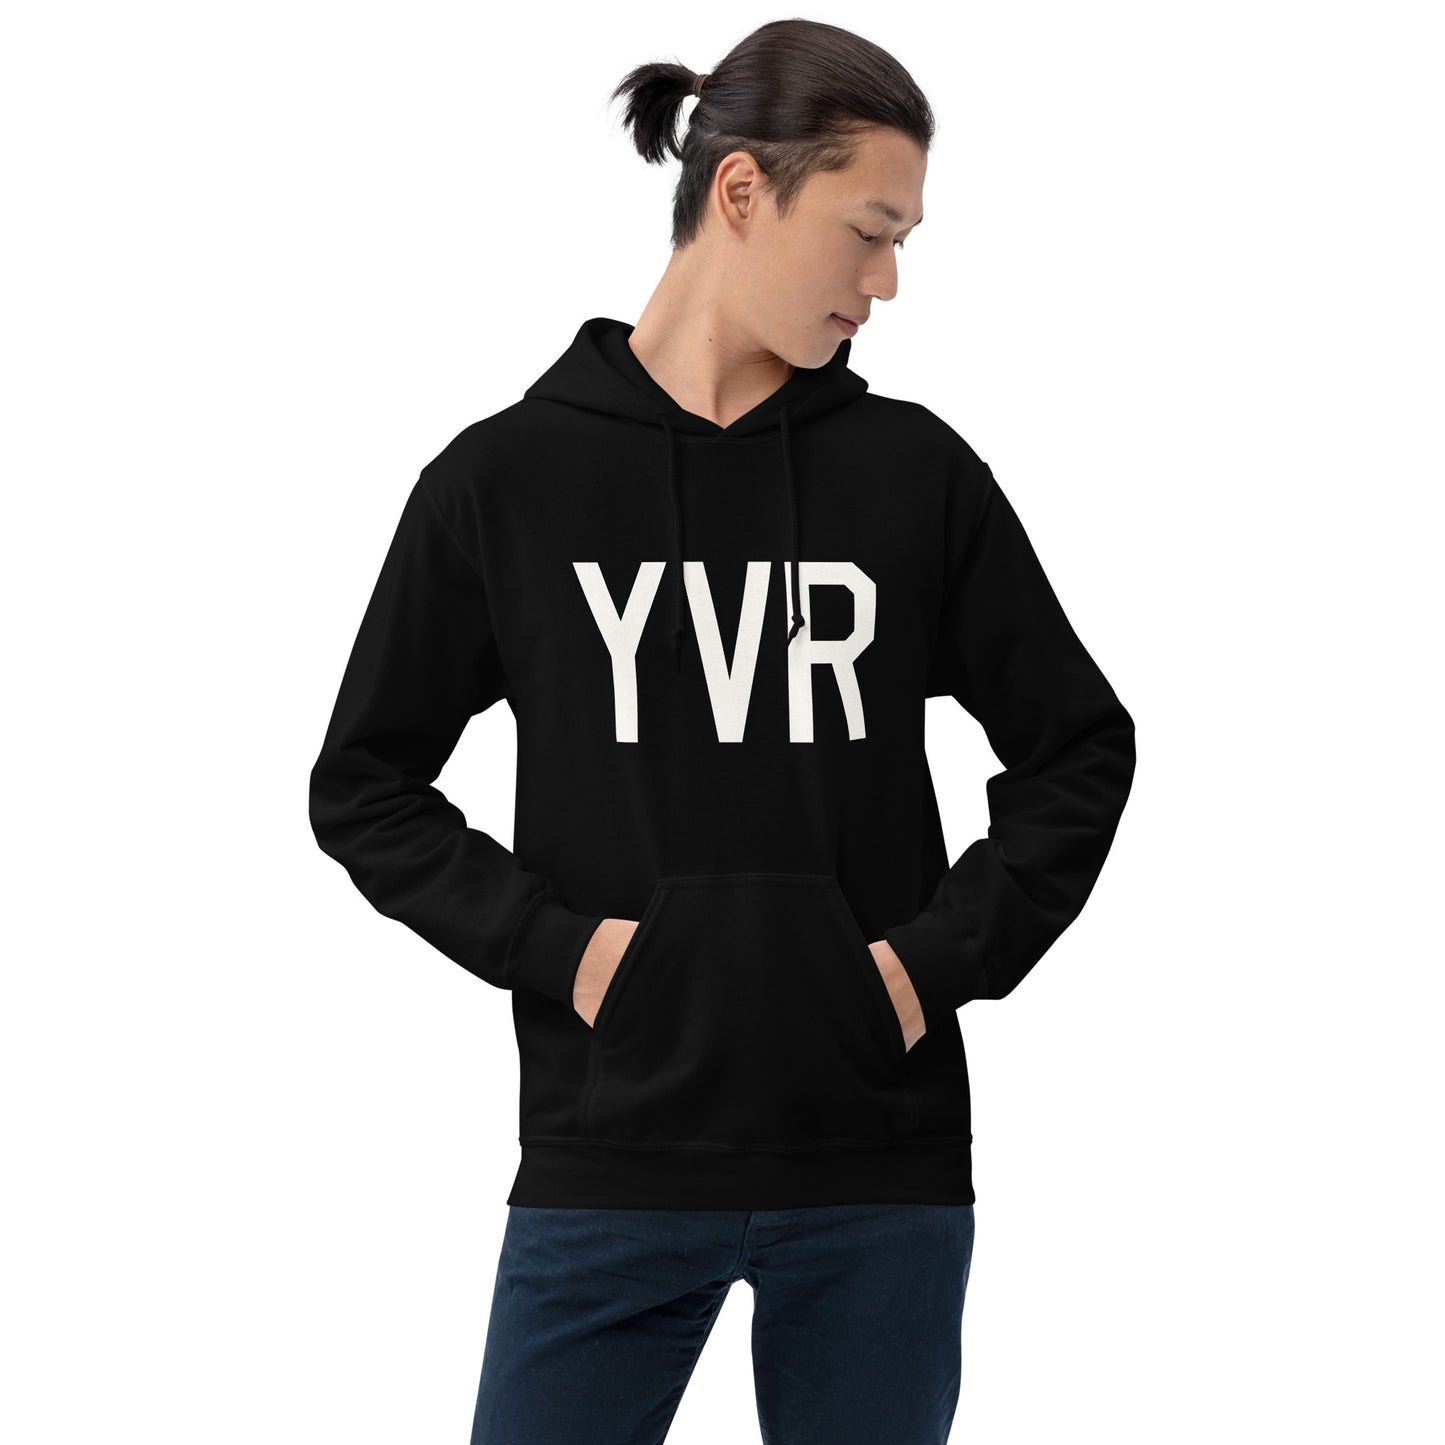 Unisex Hoodie - White Graphic • YVR Vancouver • YHM Designs - Image 07